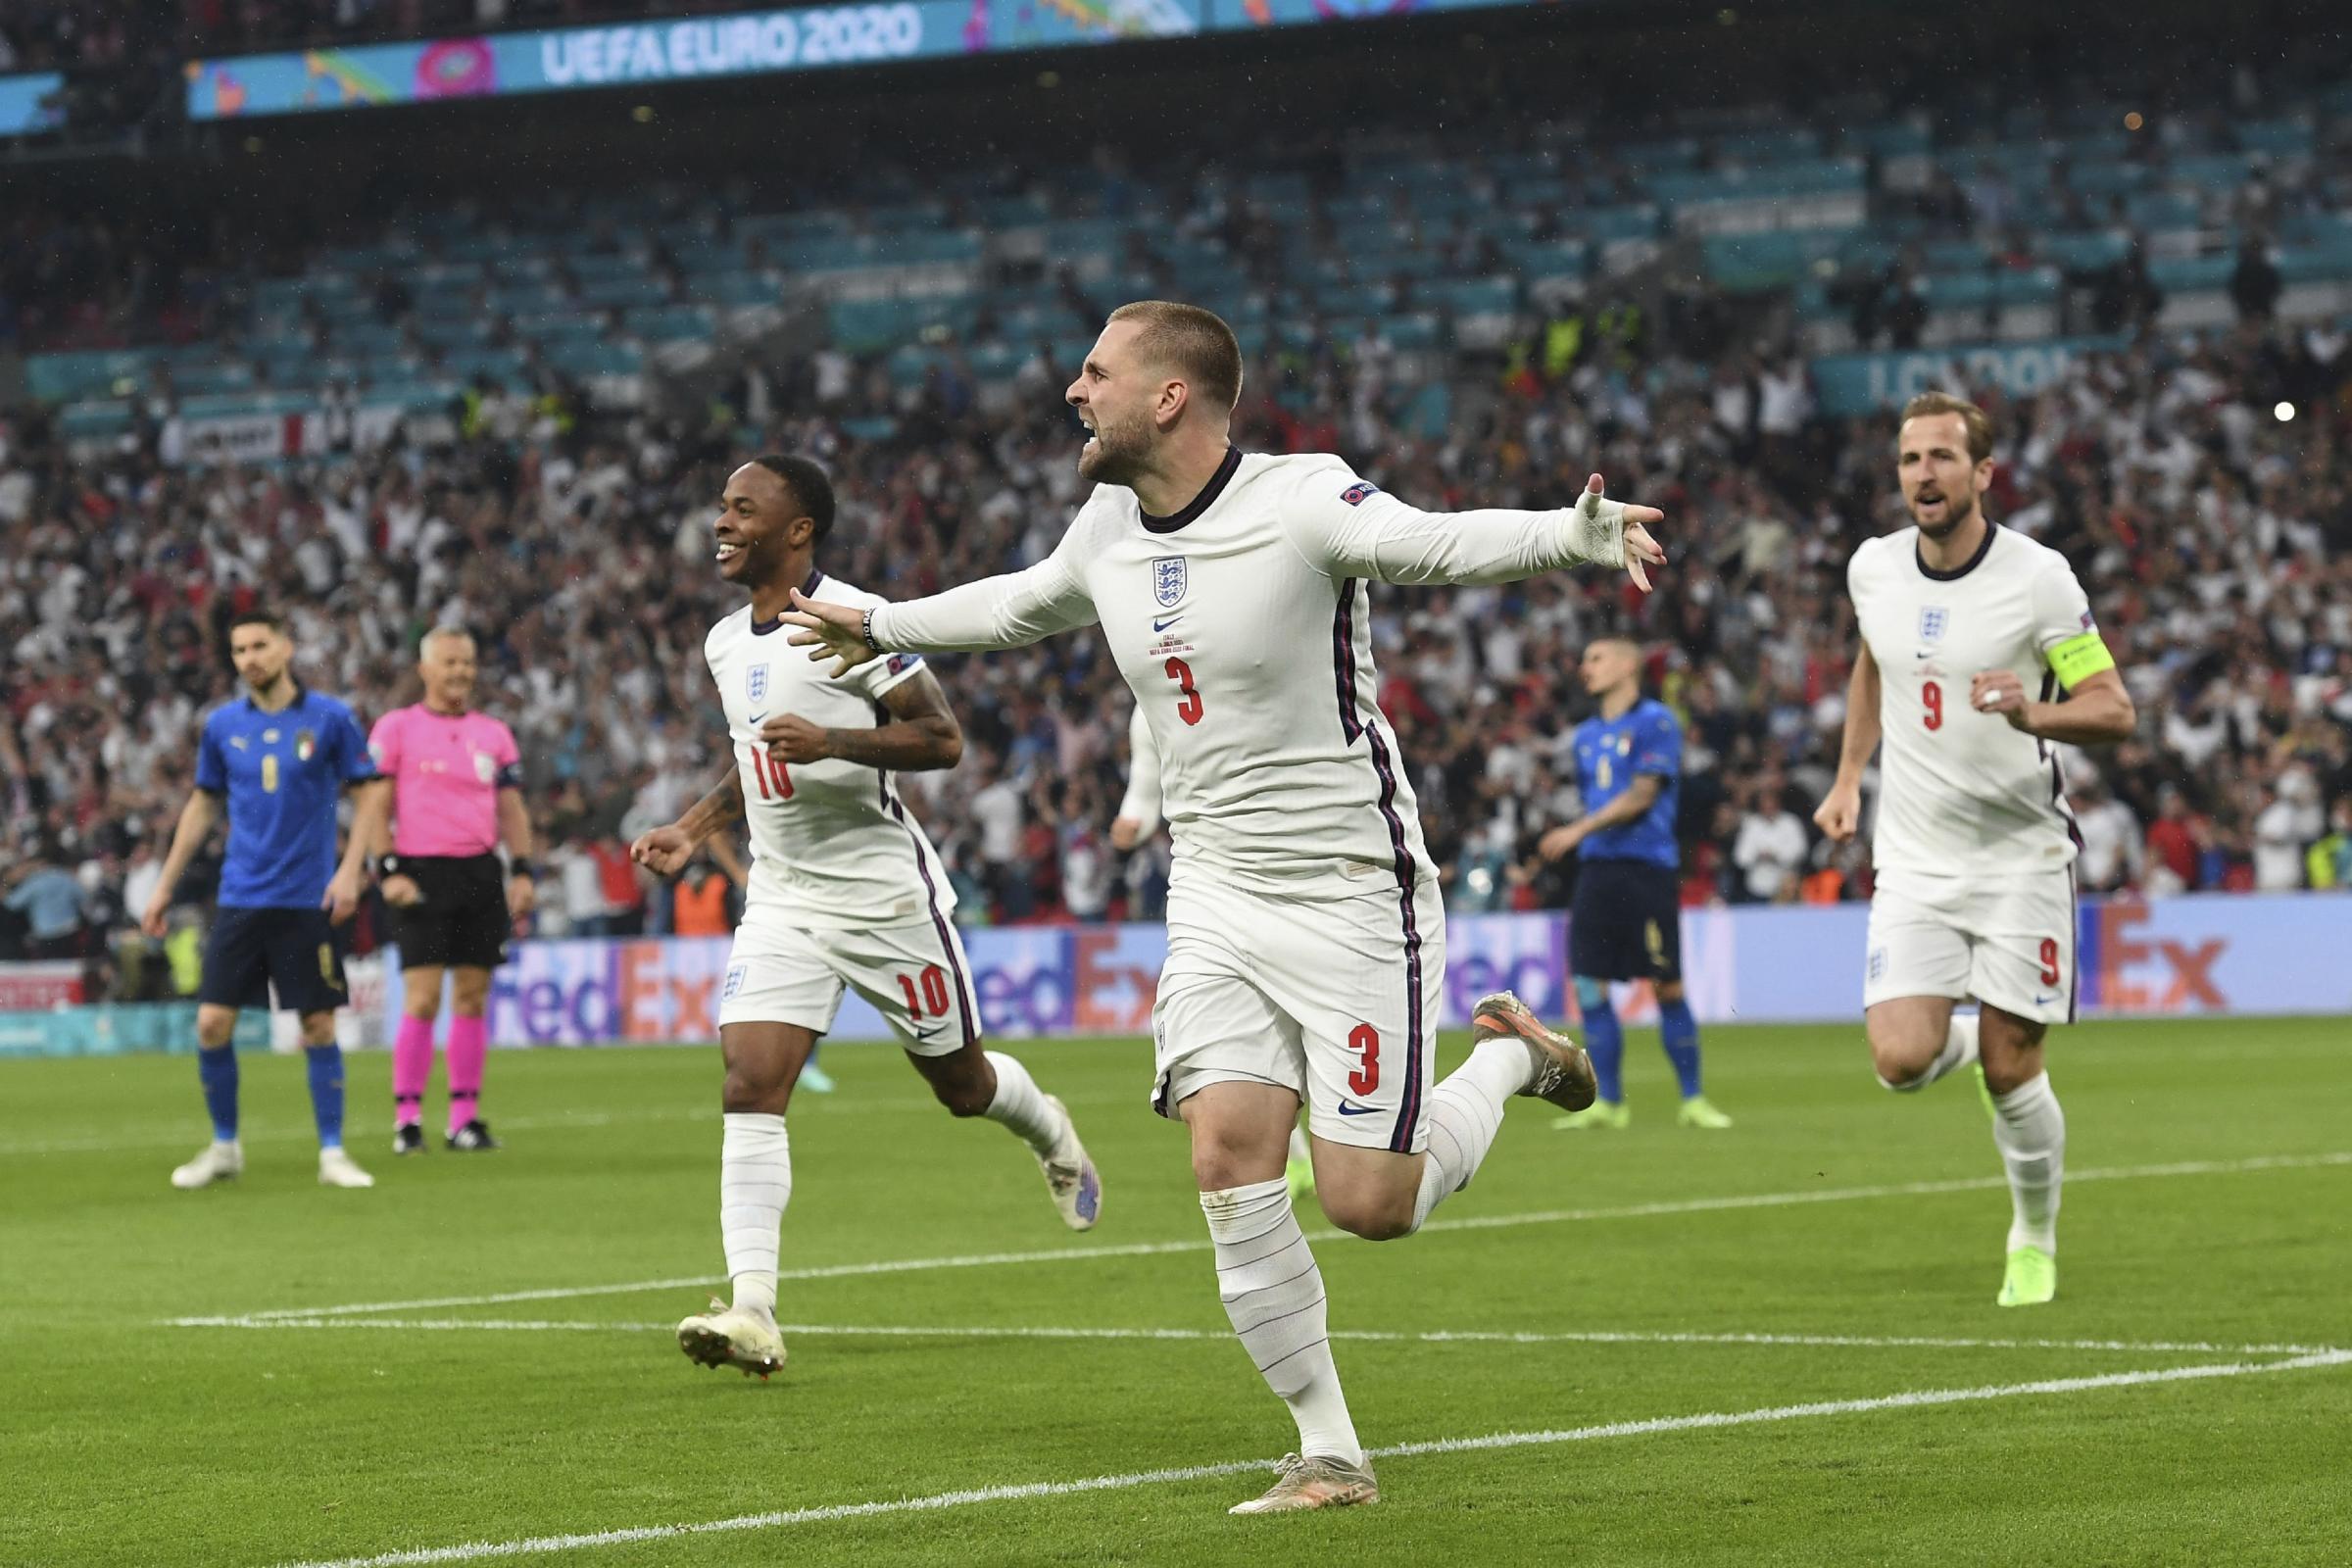 Englands Luke Shaw, center, celebrates after scoring his sides opening goal during the Euro 2020 soccer final match between England and Italy at Wembley stadium in London, Sunday, July 11, 2021. (Andy Rain/Pool Photo via AP).